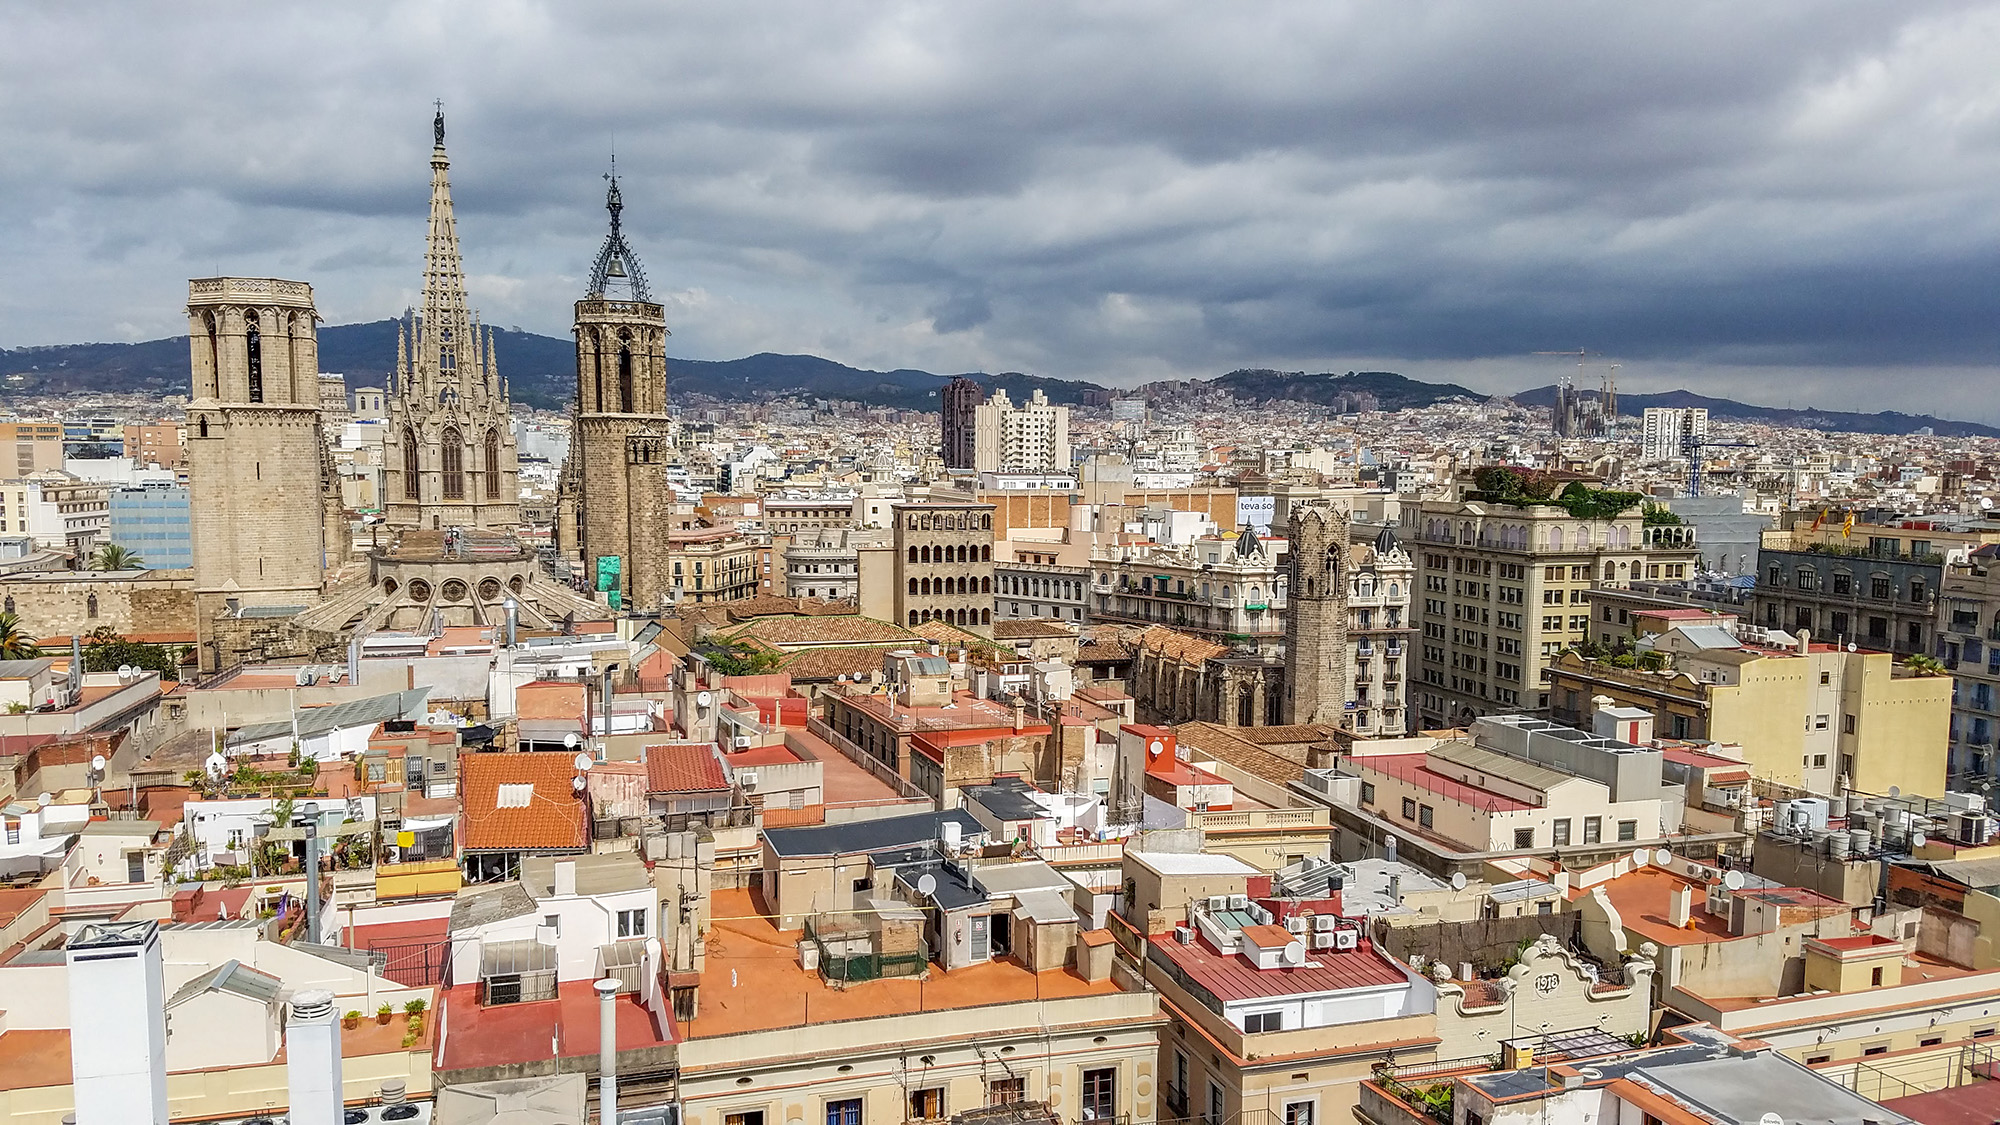 4. View of Barcelona city from rooftop of Just i Pastor - Photo by Shelley Treadaway